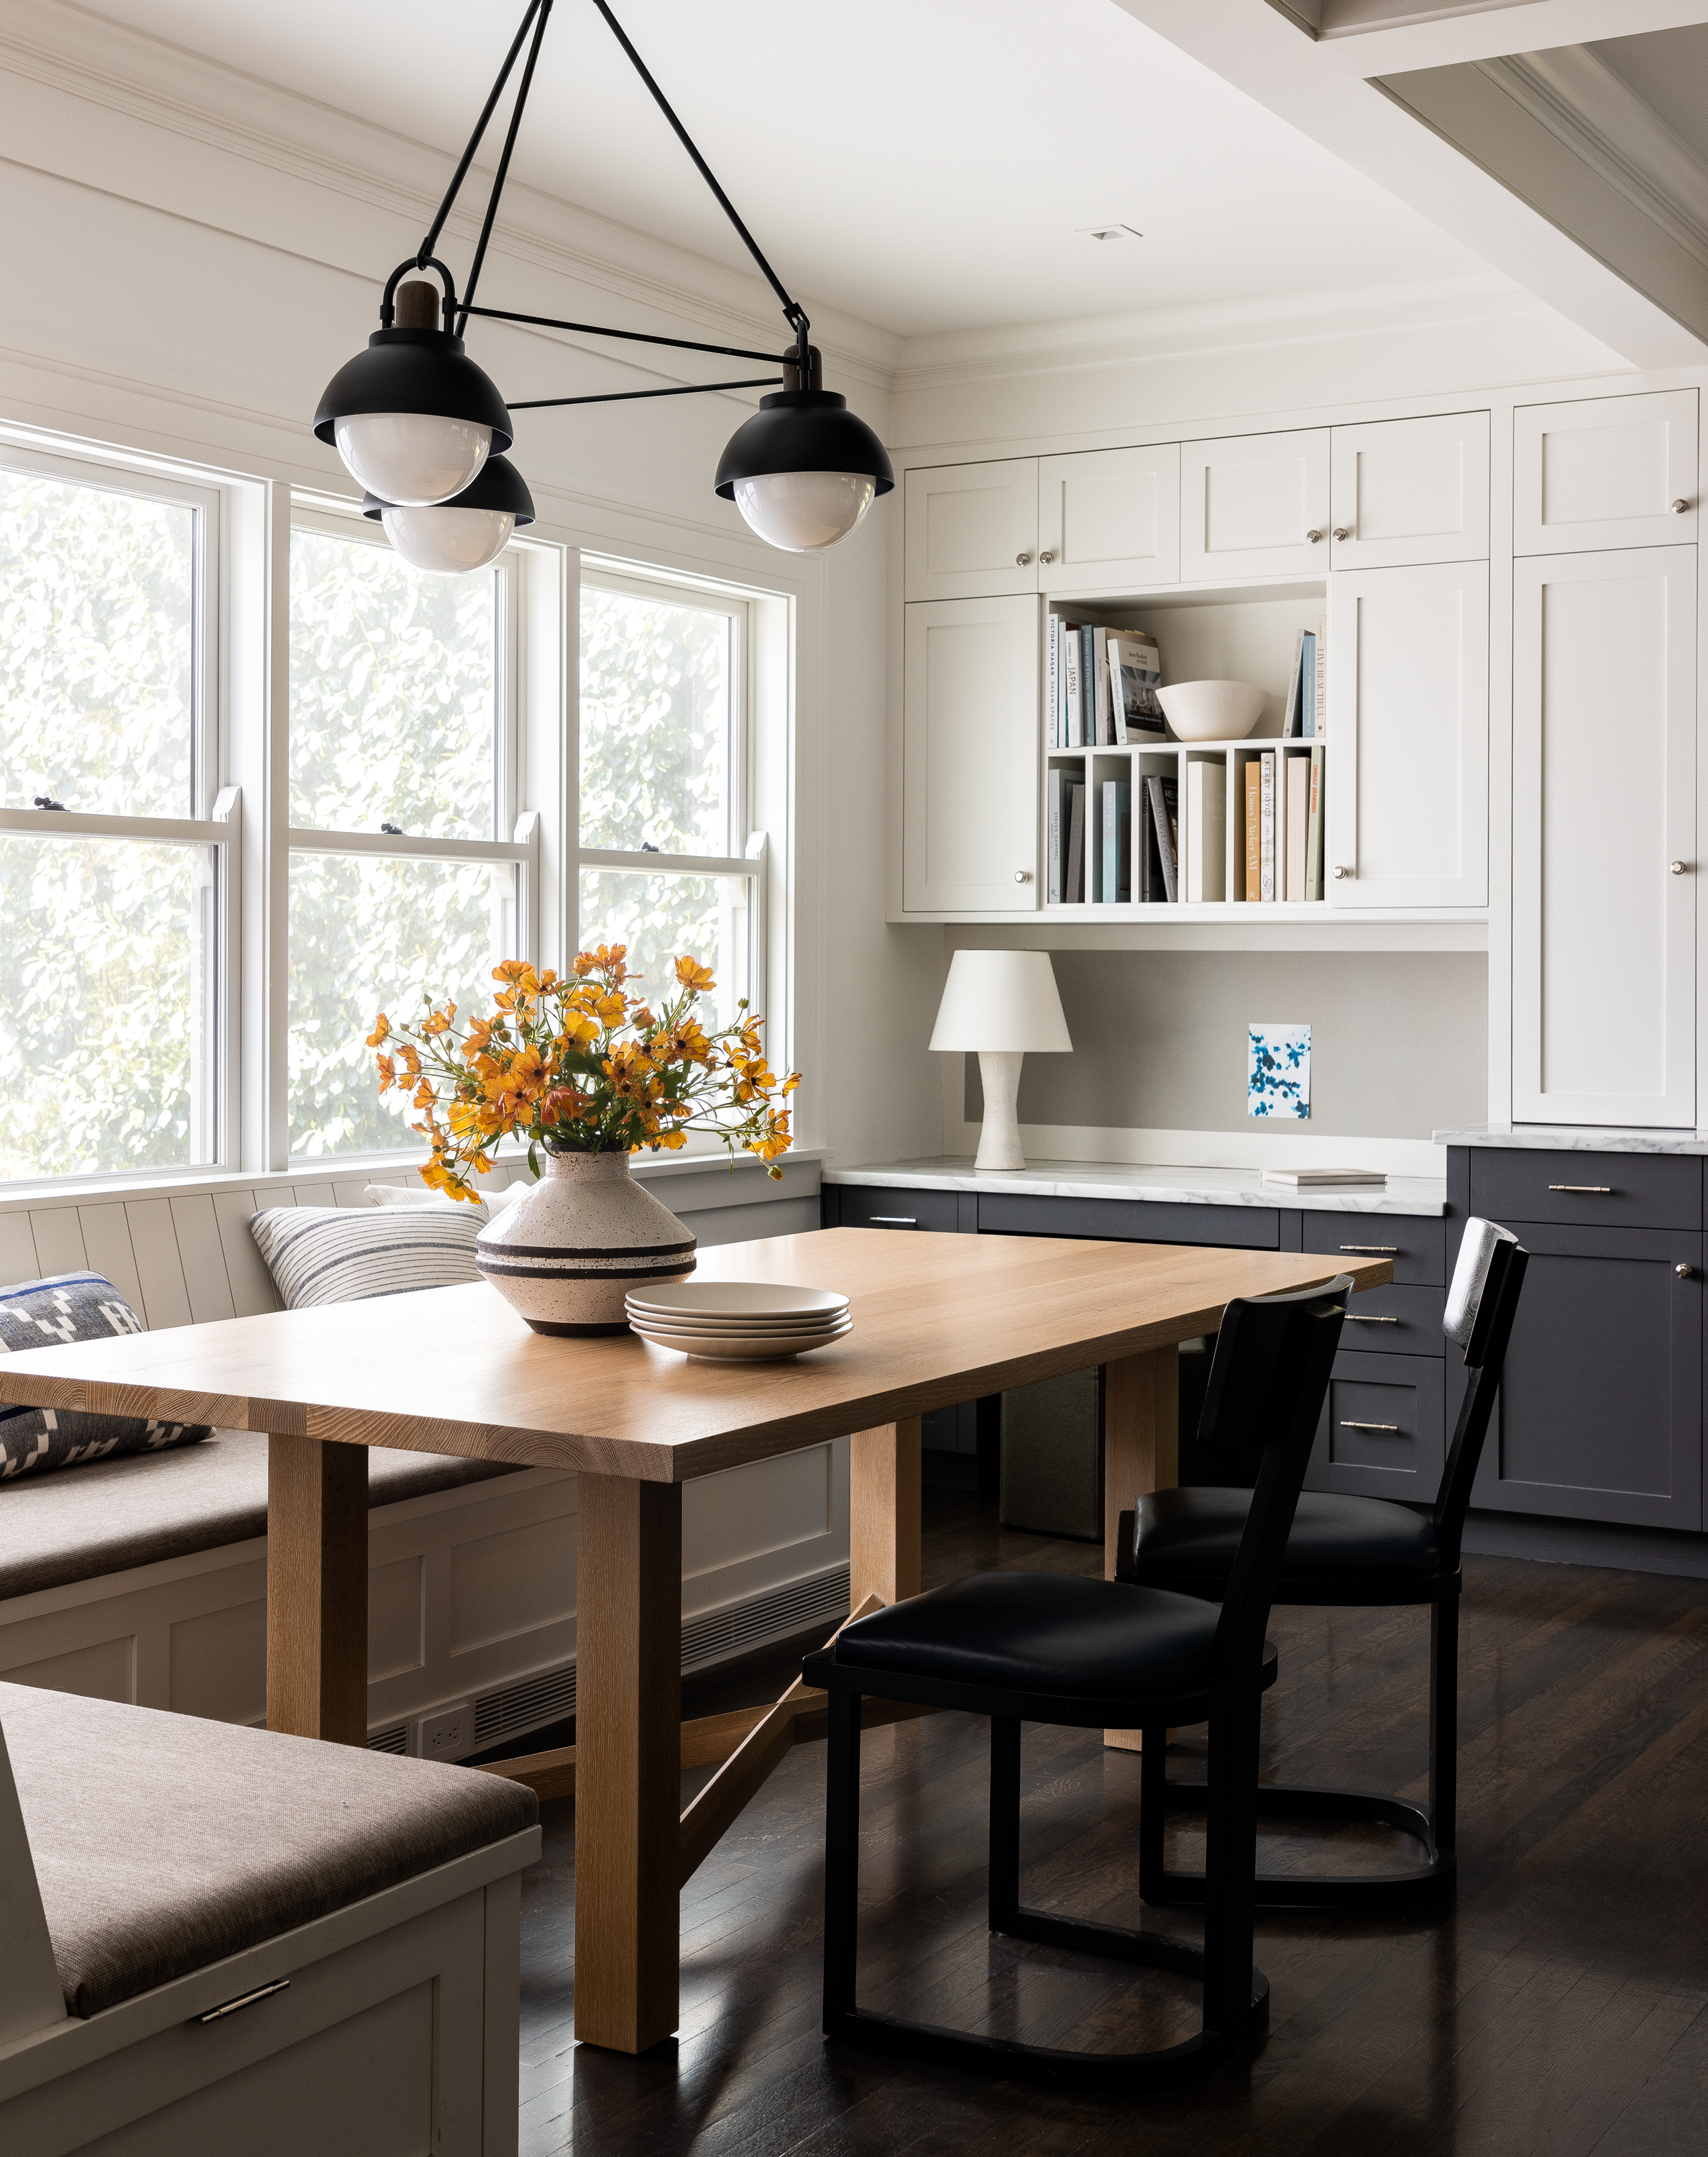 A cozy kitchen nook featuring built-in banquette seating, an Allied Maker light fixture, an oak-finish table, and black-and-white cabinetry.